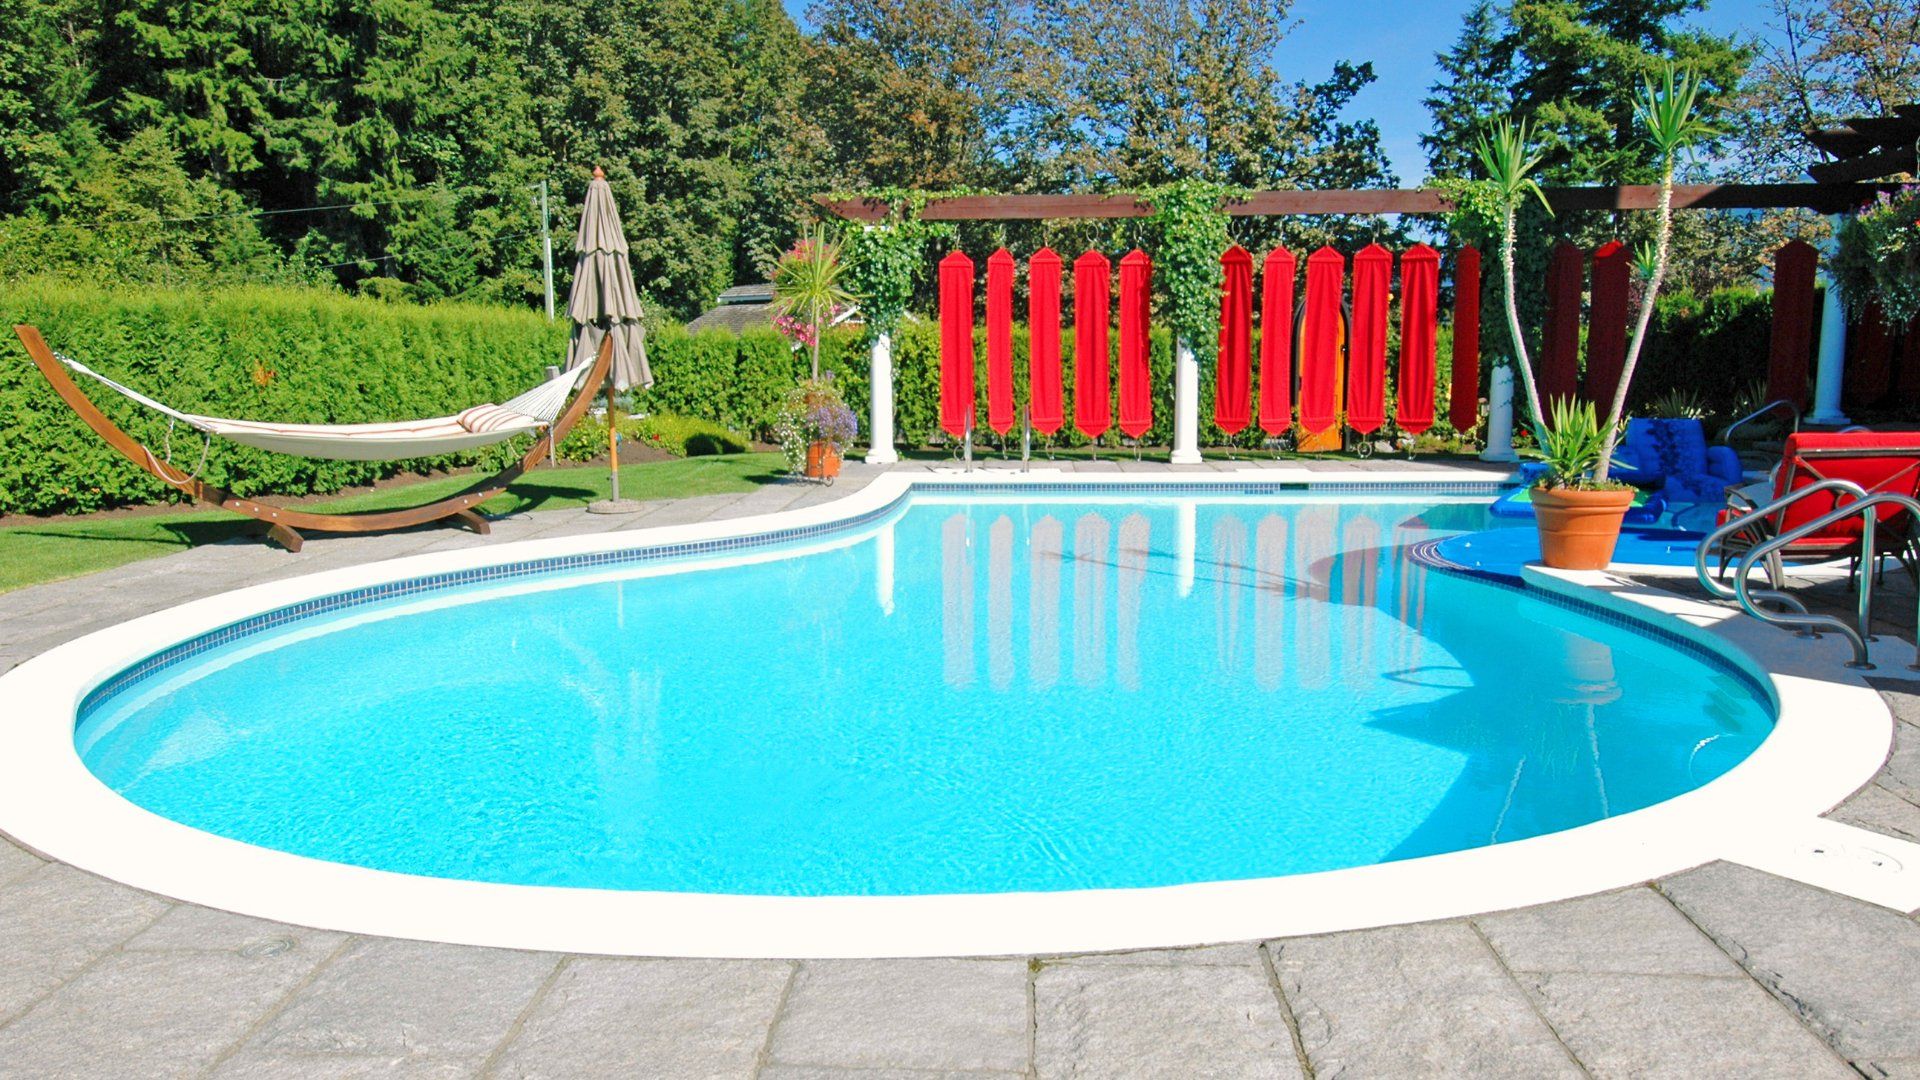 Backyard pool with a stamped concrete pool deck.  The backyard is lined with cedar hedges.  There is a hammock and some modern looking decorations.